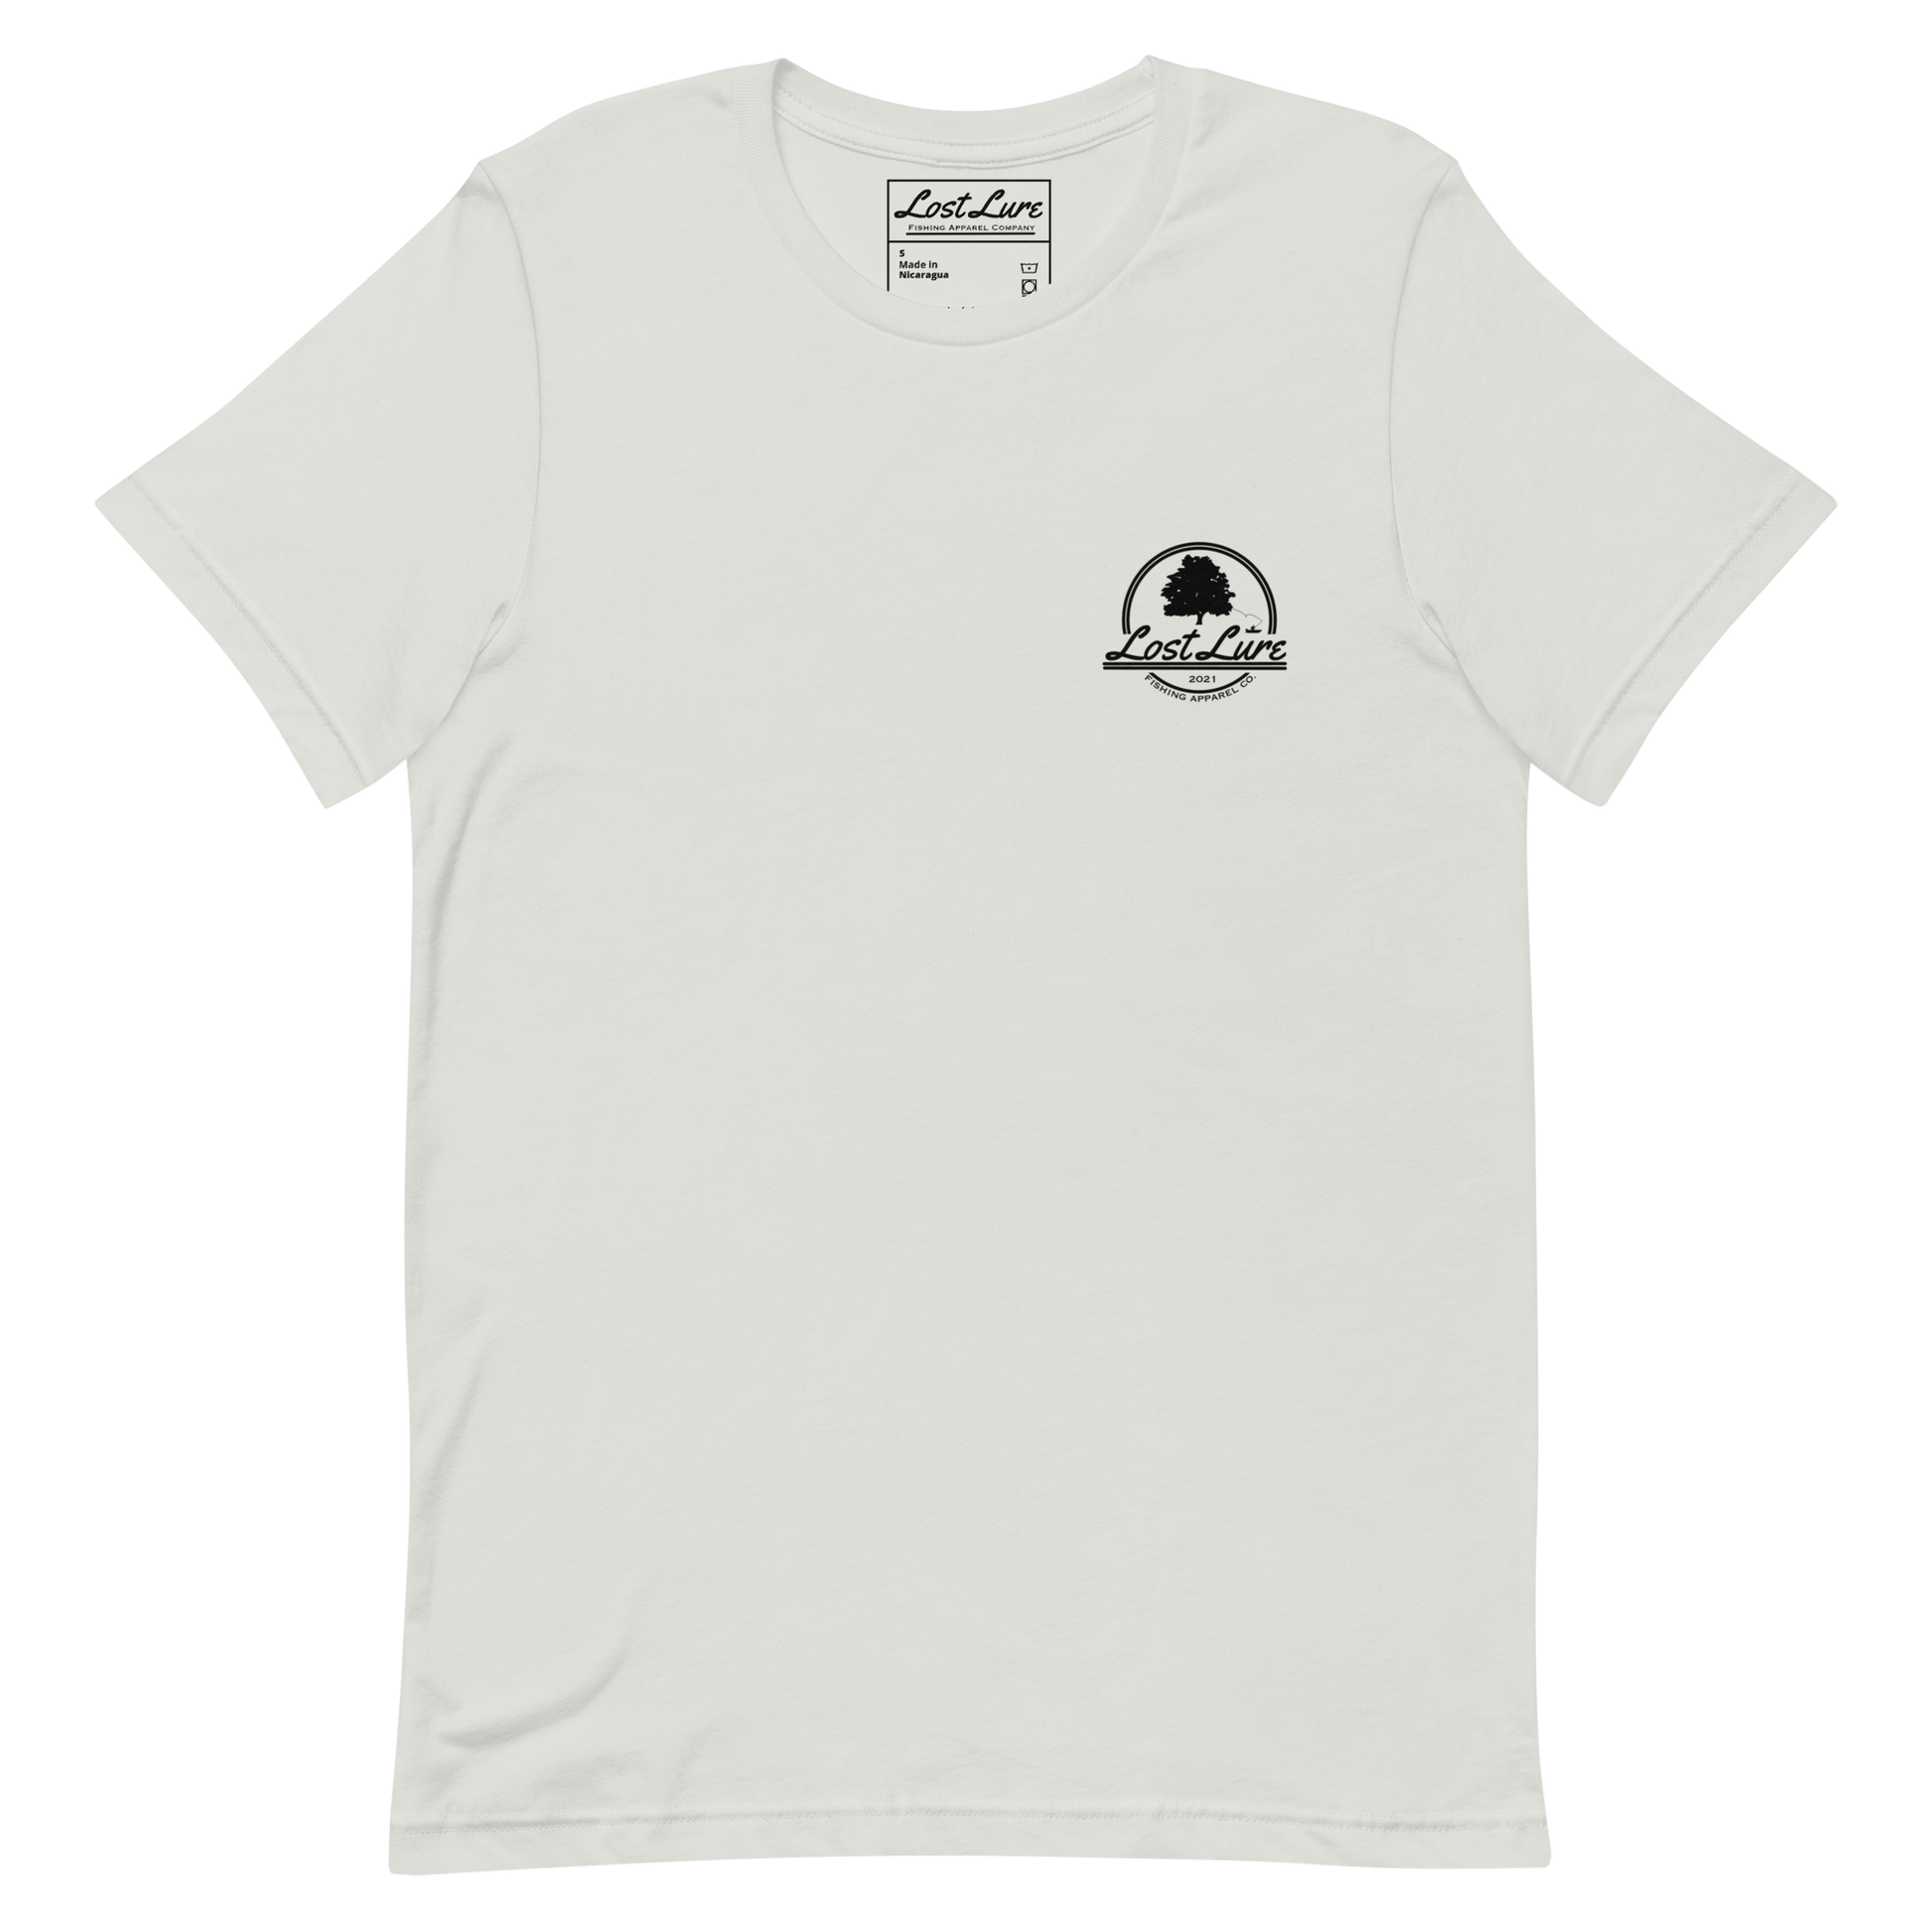 Bass fishing shirt. It has a drawing of a fat bass and it reads “lost lure co, catch fat fish”. The bass design is on the back, the lost lure logo is on the front. Silver colored  shirt, front side 